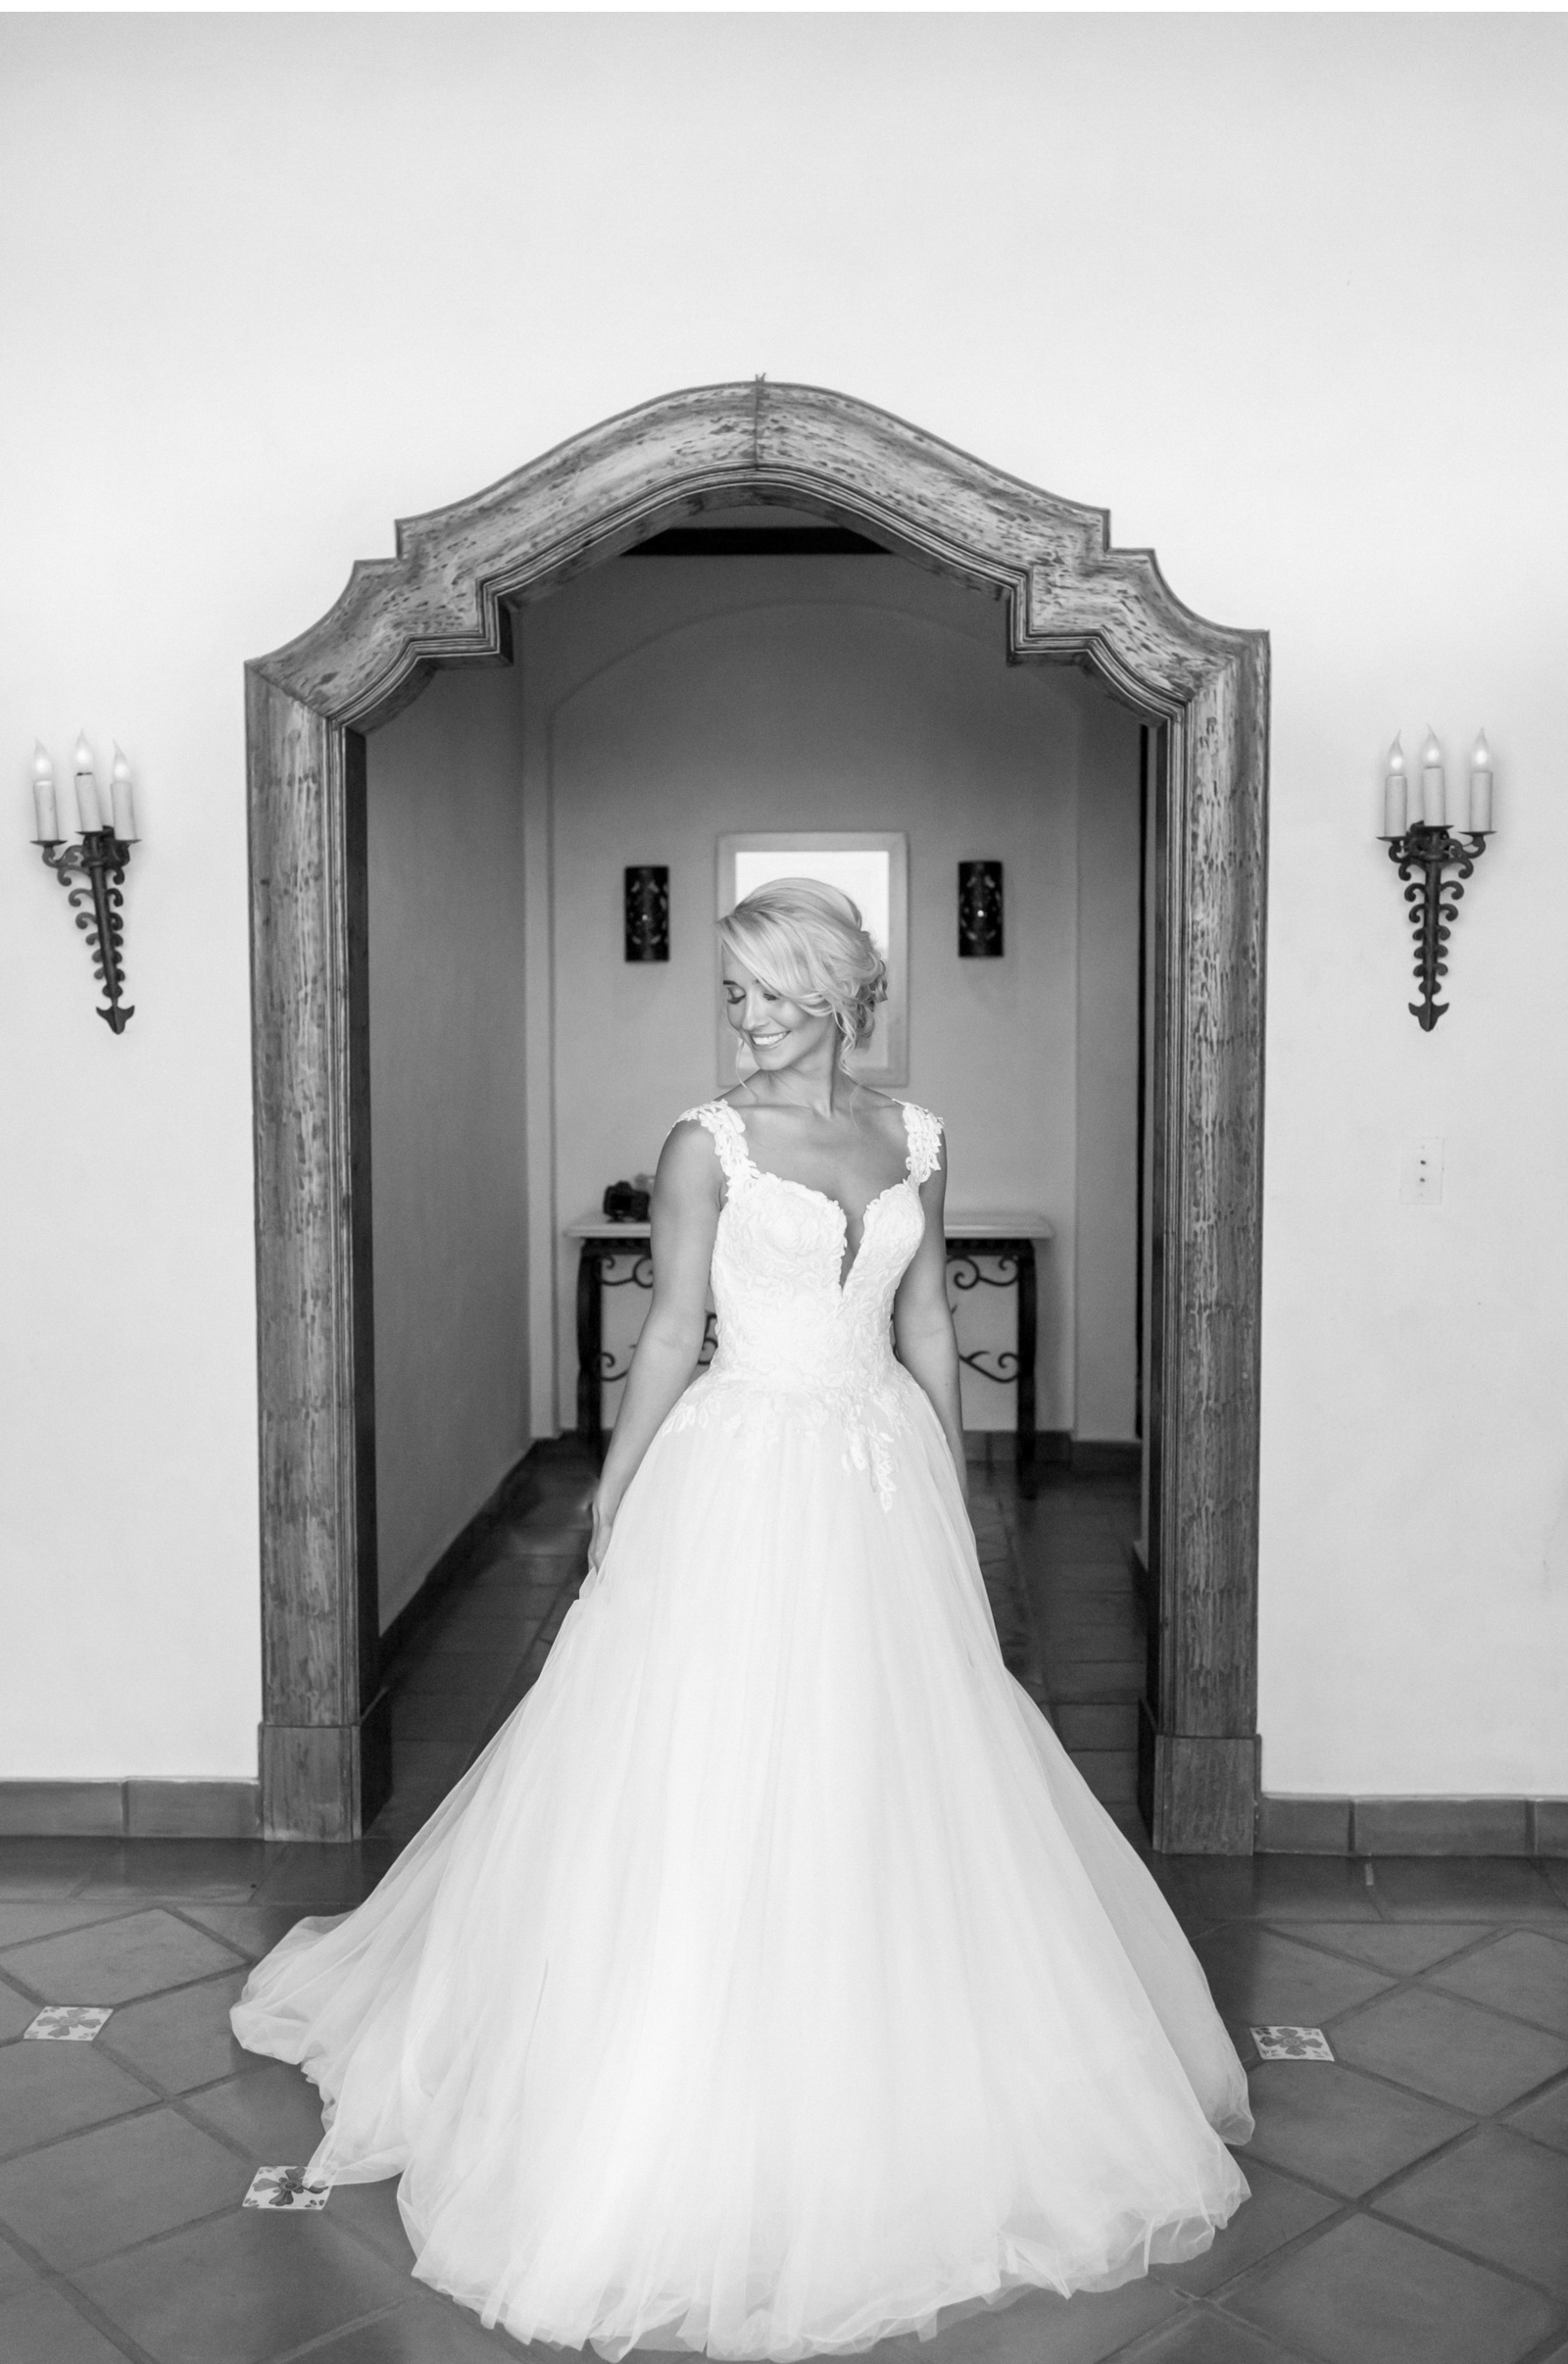 Cabo-Del-Sol-Wedding-Natalie-Schutt-Photography-Inspired-By-This_04.jpg